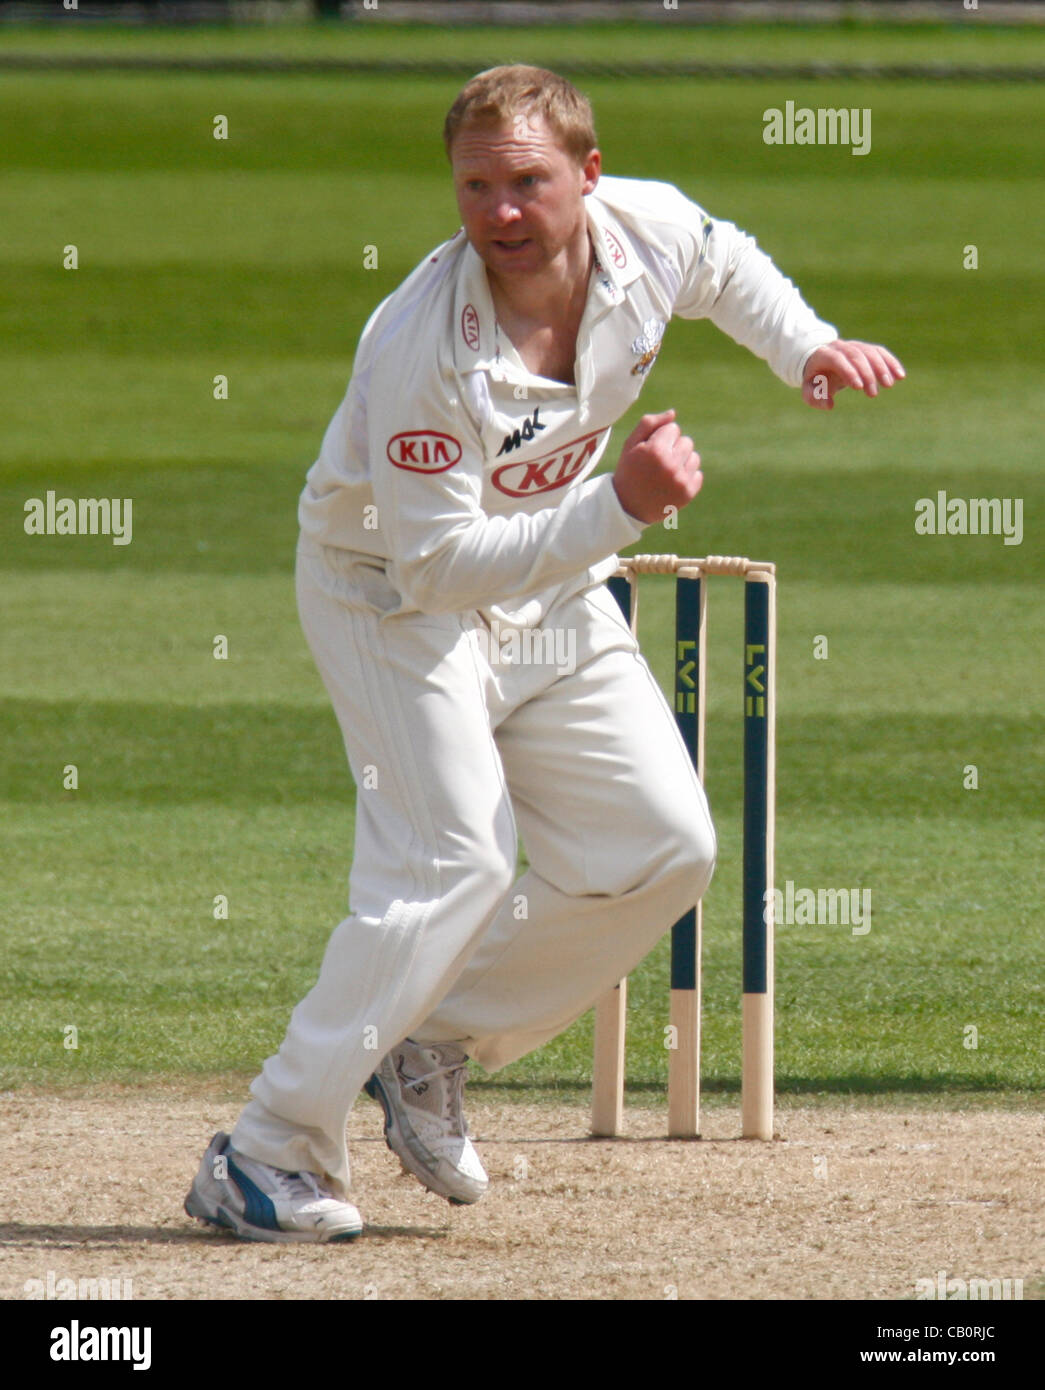 16.05.12 The Kia Oval,London, ENGLAND: Gareth Batty of Surrey County Cricket during the LV County Championship - Division One fixture between Surrey and Somerset Stock Photo